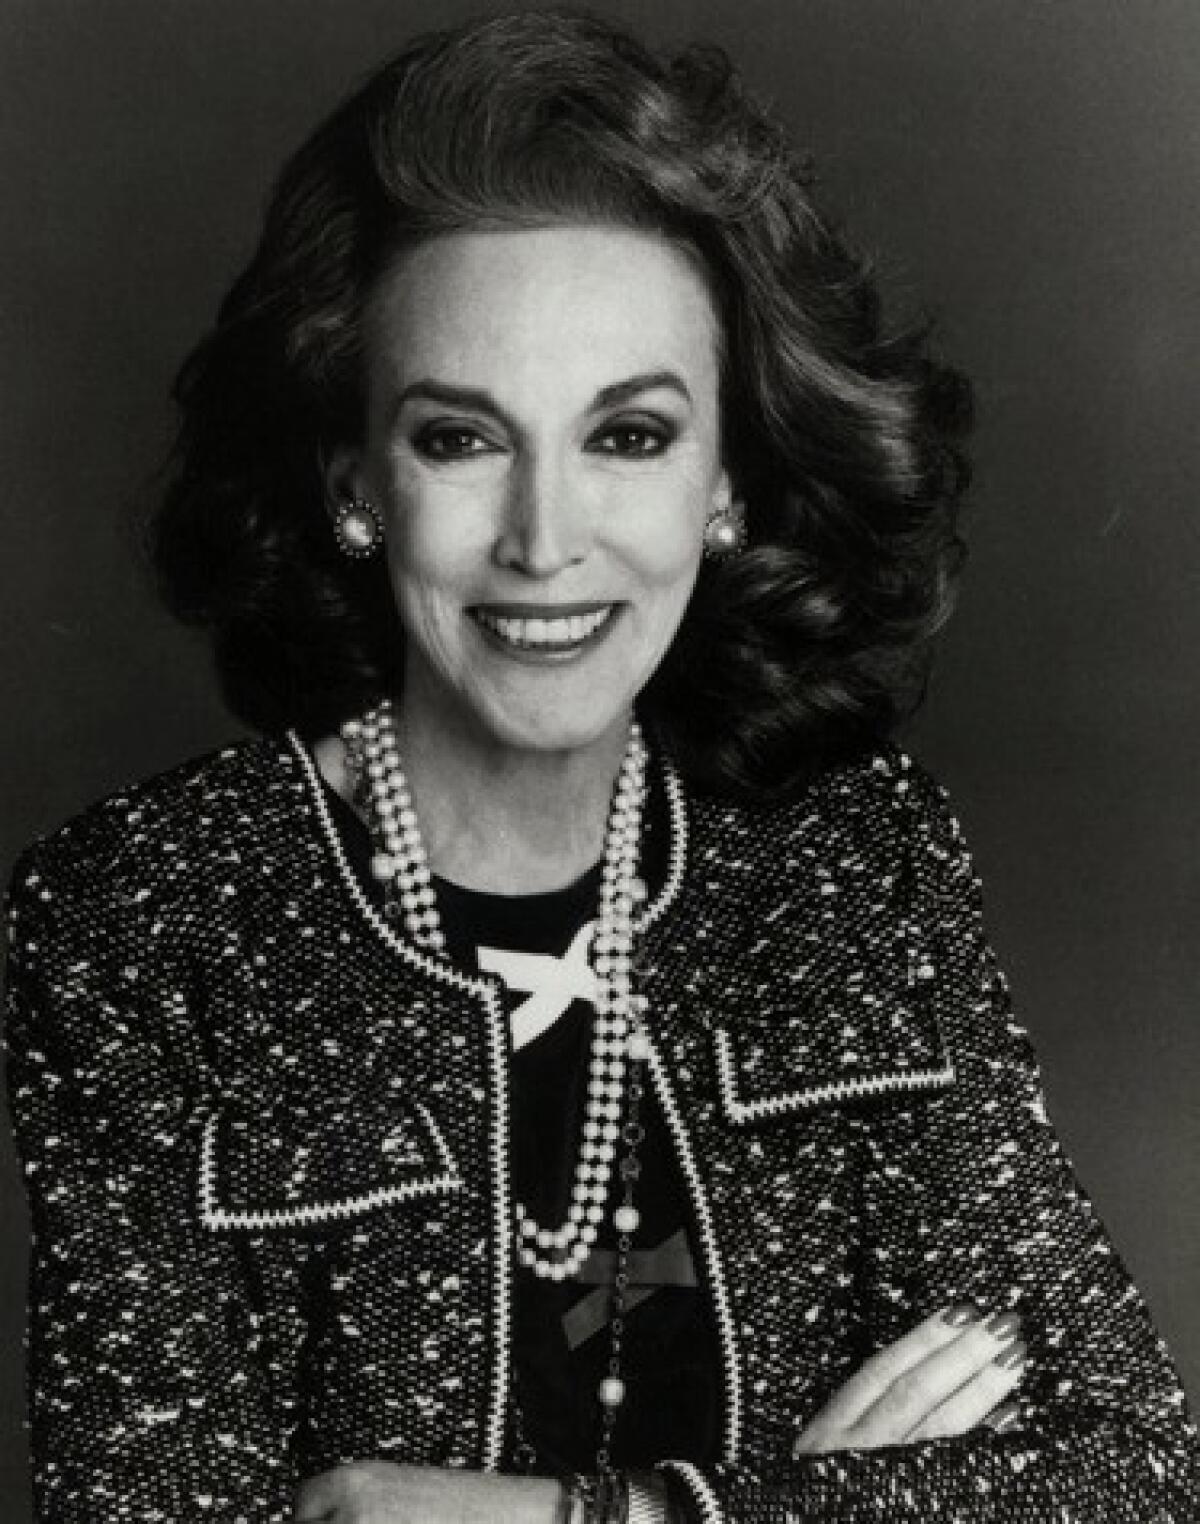 Longtime Cosmopolitan magazine editor Helen Gurley Brown, seen in this undated photo provided by Hearst Magazines, died Monday at the age of 90.